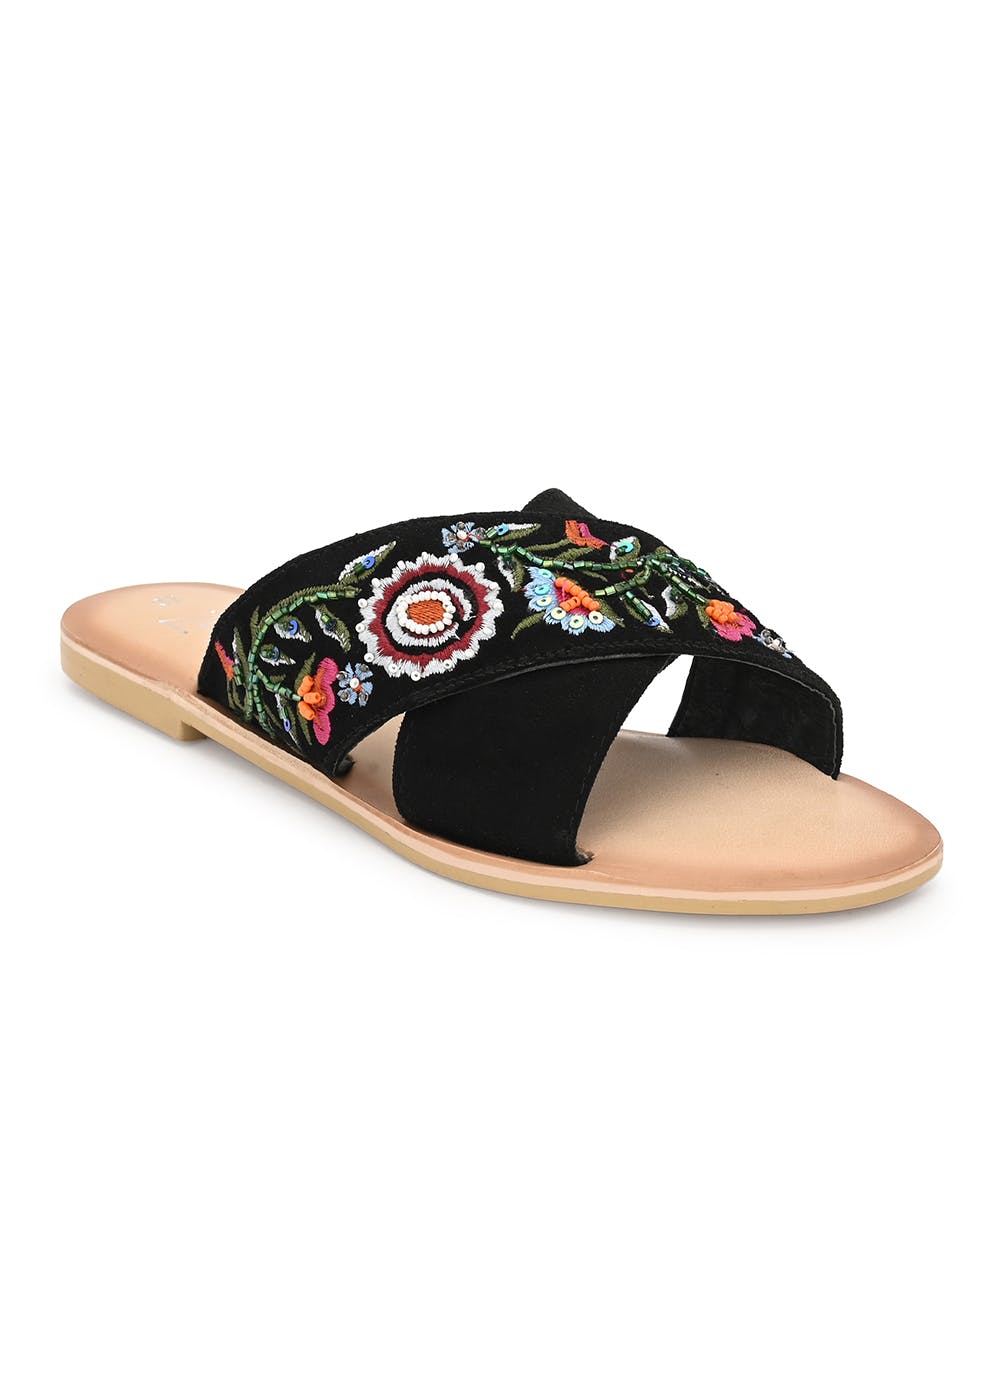 Get Embroidered Cross Strapped Slides 